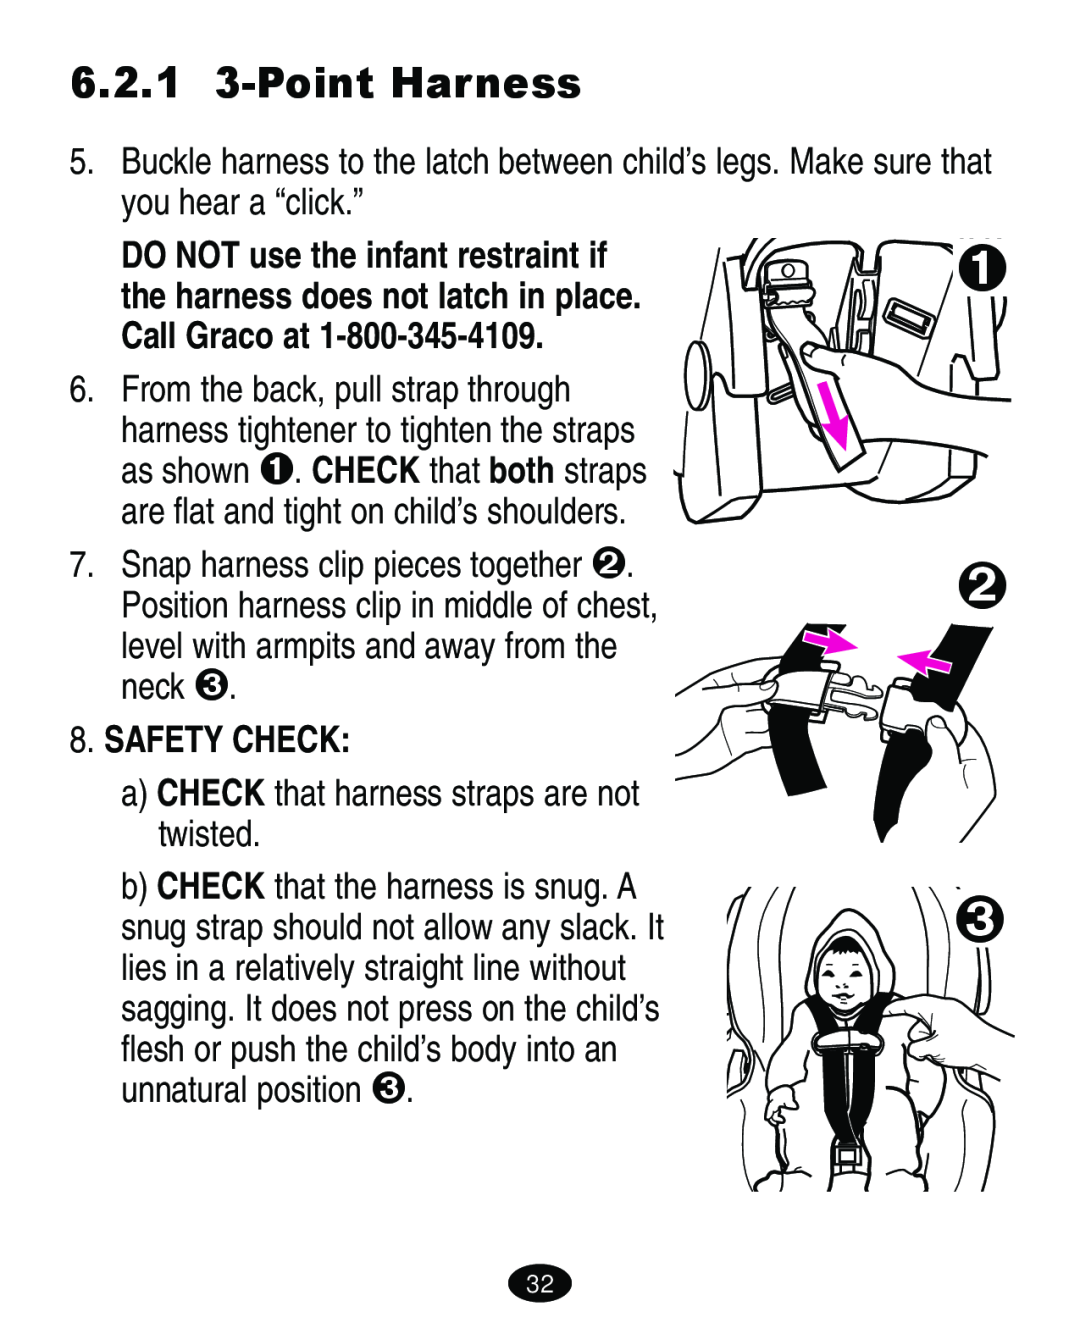 Graco ISPA108AB manual 6.2.1 3-Point Harness, Safety Check 